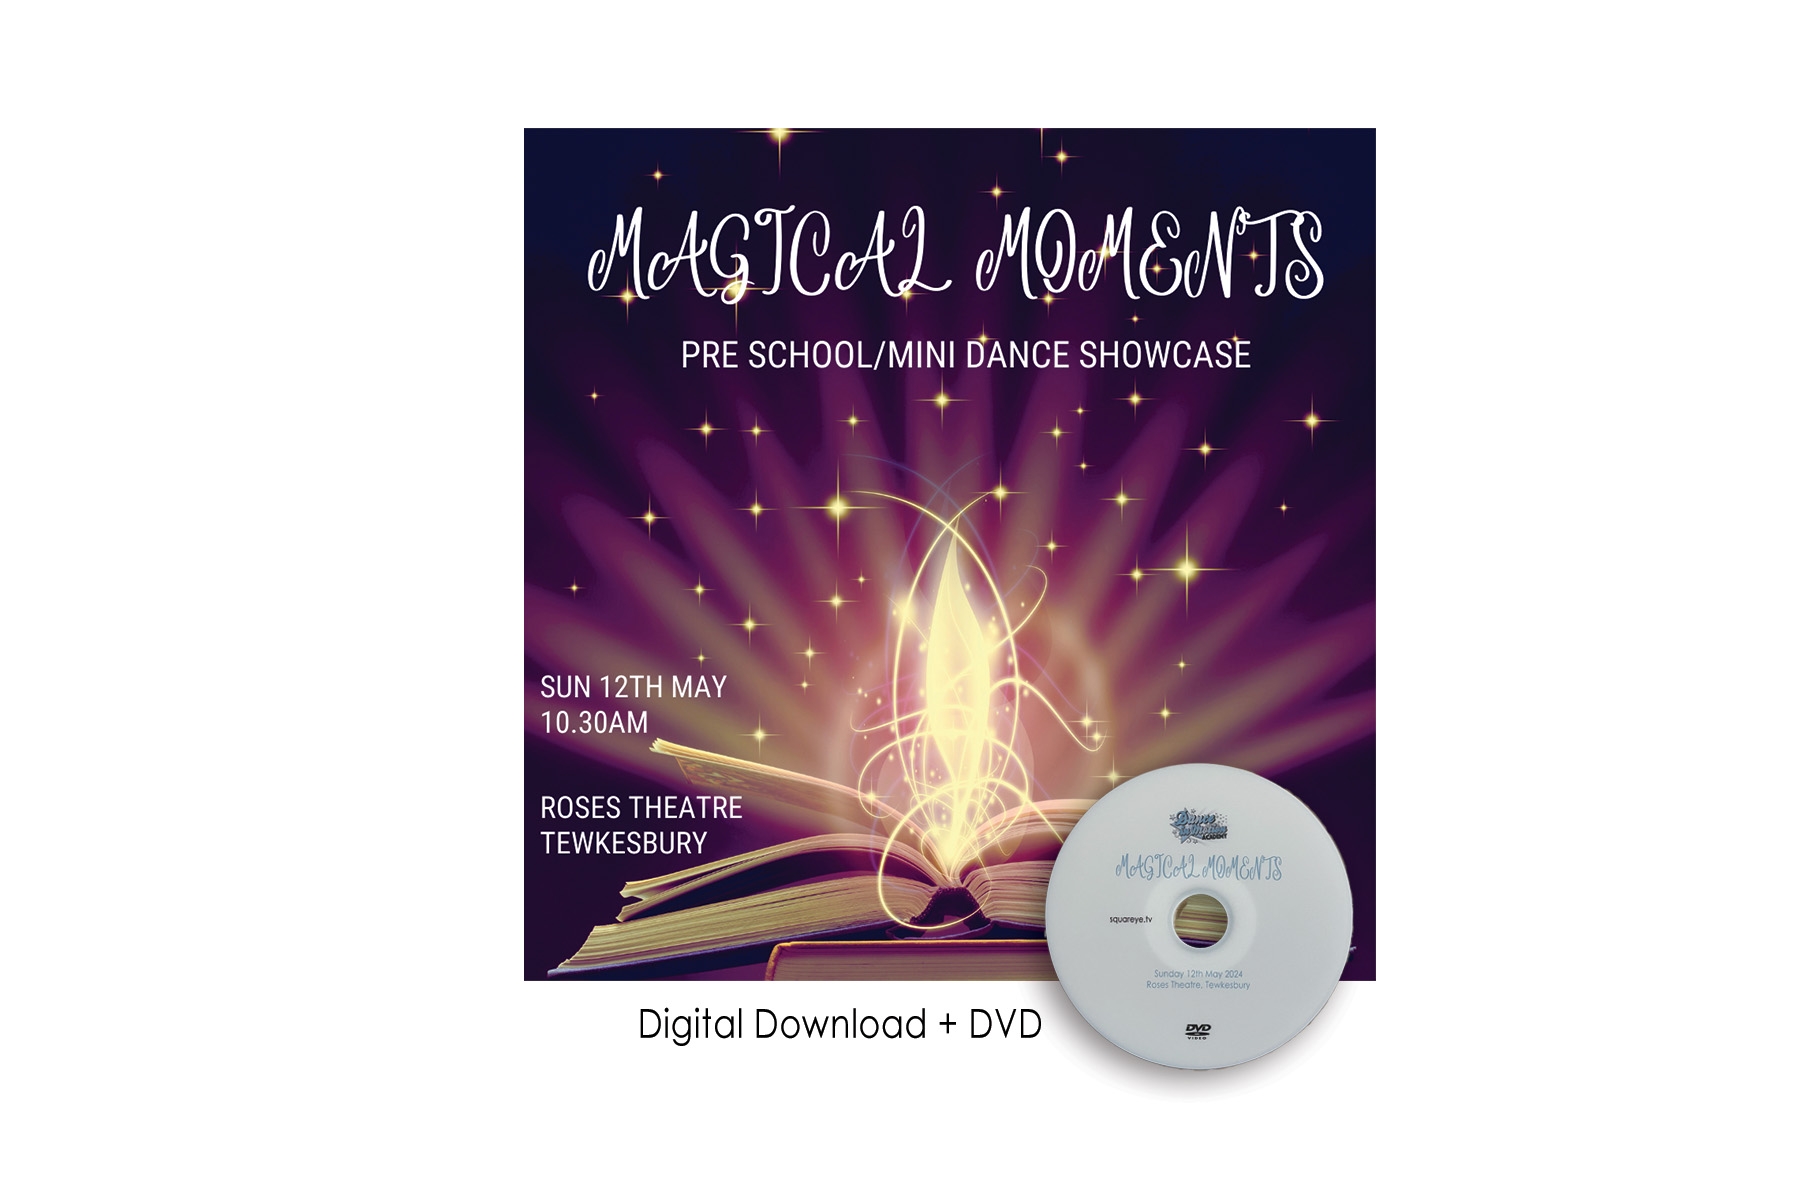 Dance in Motion Academy ‘Magical Moments’ – DIGITAL DOWNLOAD + DVD